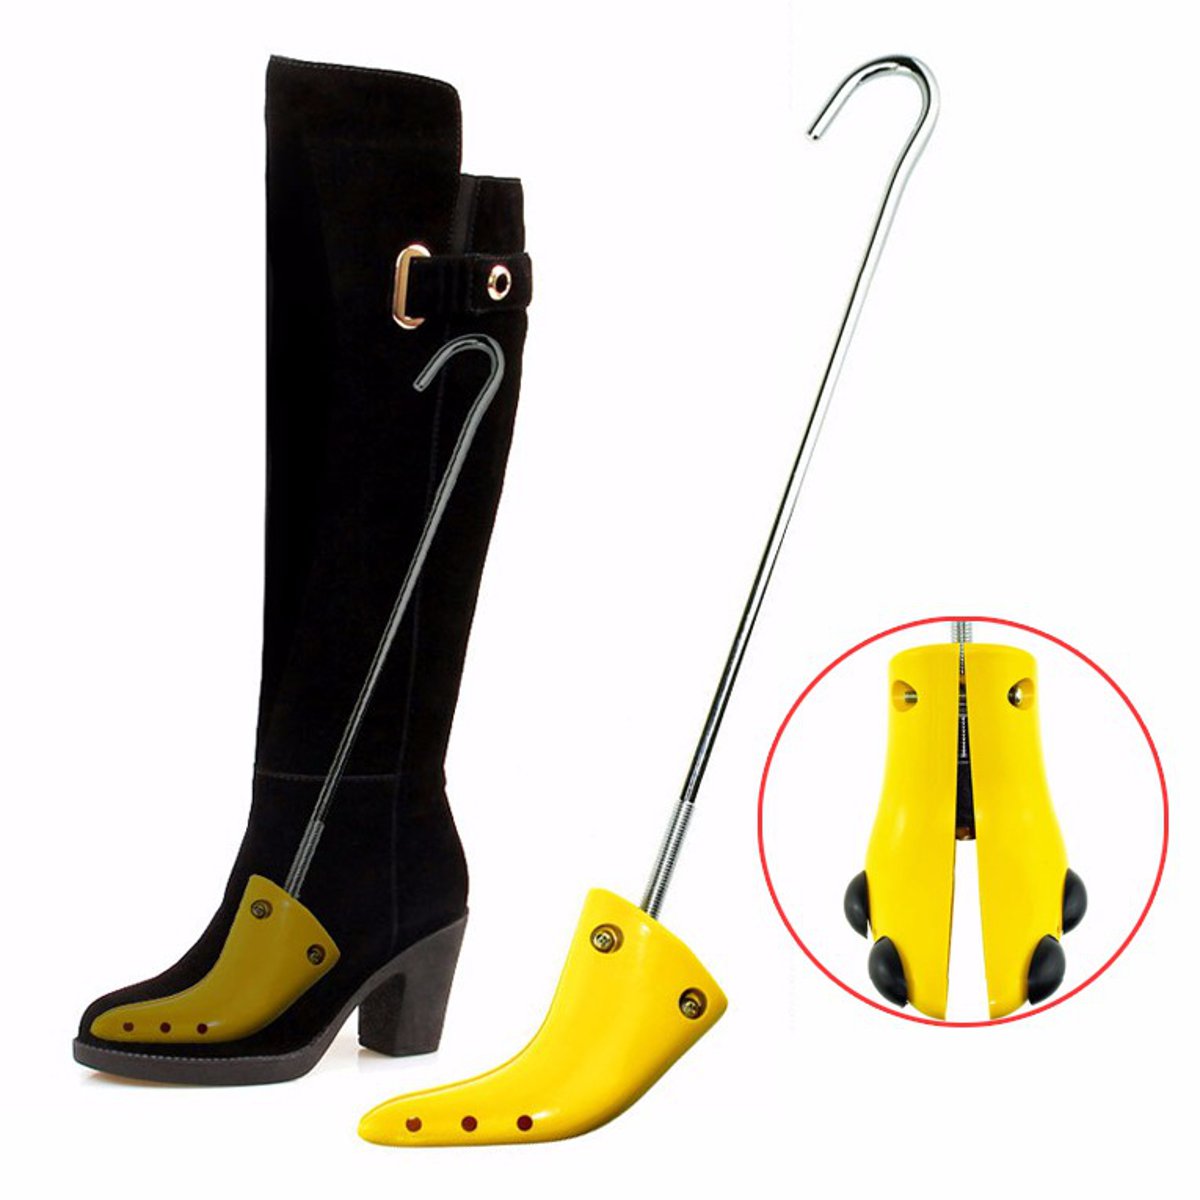 Professional-Boot-Stretcher-Adjustable-Width-Shoe-Shaper-Extender-Wooden-Boot-Tree-Stretch-for-Women-1382436